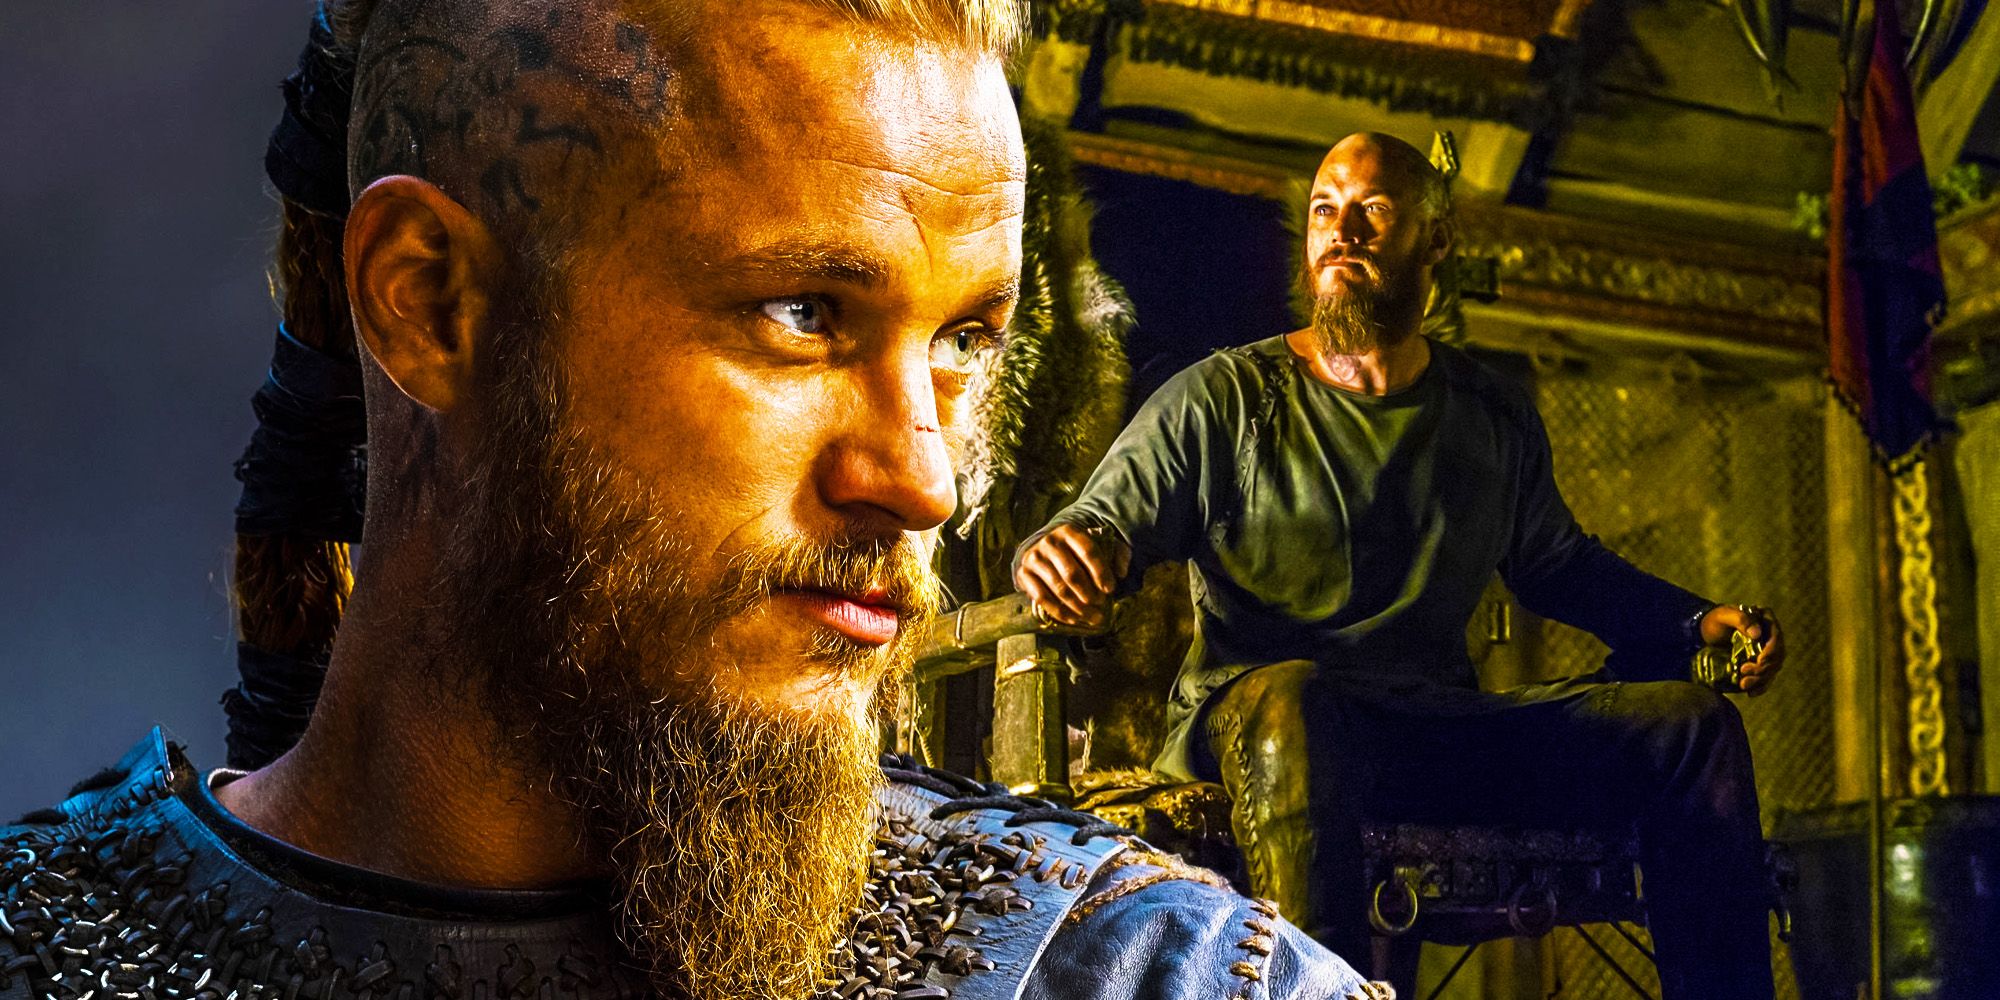 king ragnar, out of ideas rn